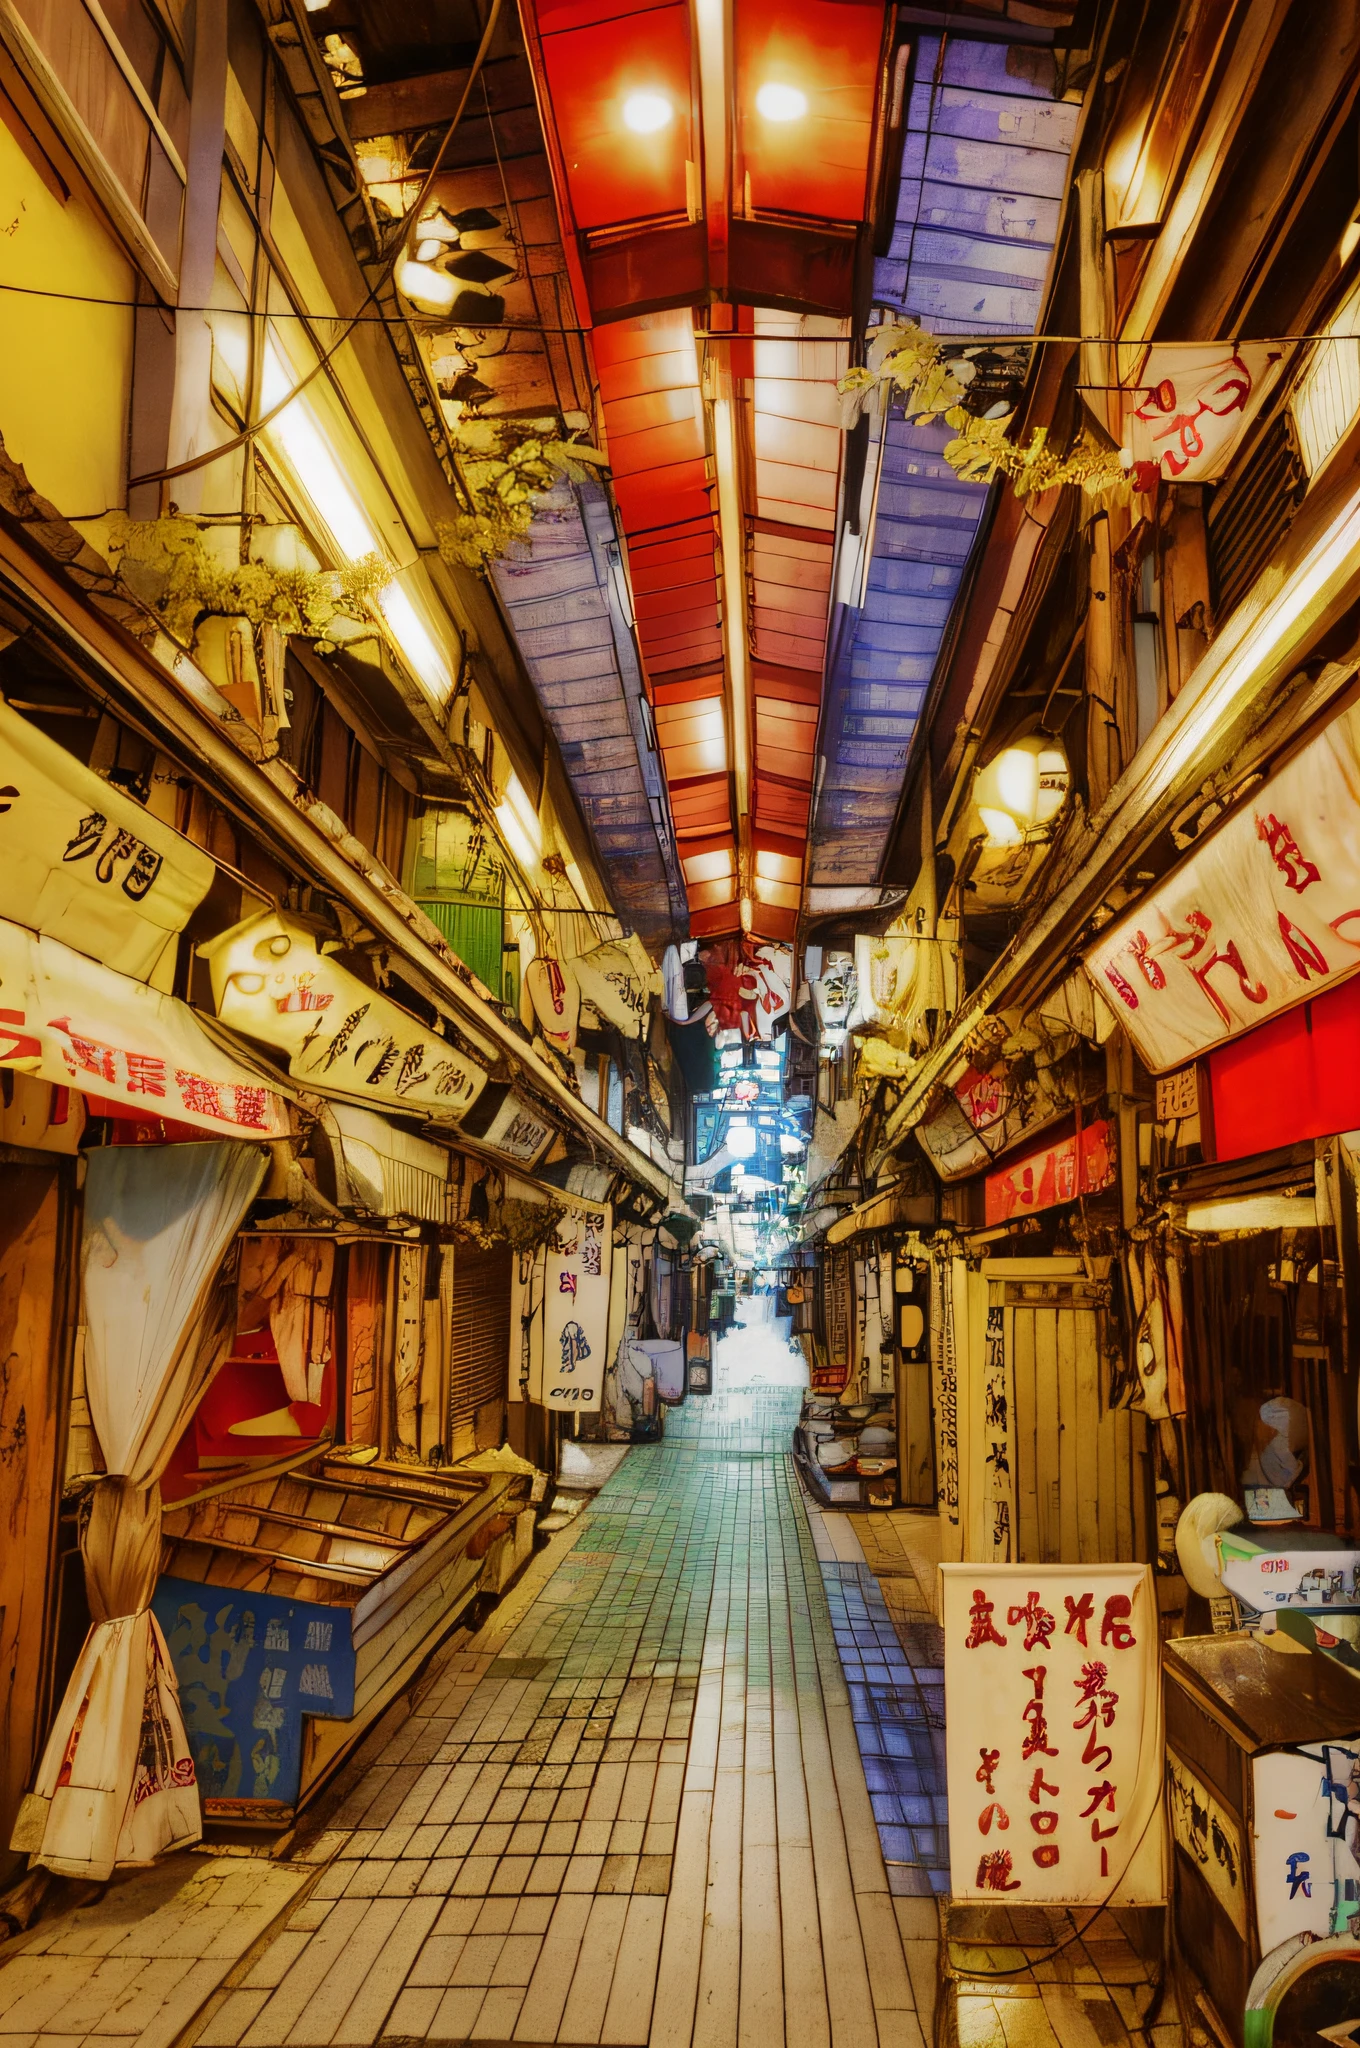 there are many signs hanging from the ceiling in this 市场, old 日本街头 市场, 市场 in japan, wet 市场 street, 市场, 荒废的新宿垃圾, 荒废的新宿垃圾 town, 日本冲绳, 东京小巷, the vibrant echoes of the 市场, 日本街头, 市场 setting, 日本市中心, fish 市场 stalls, 萨基米昌人类发展研究所